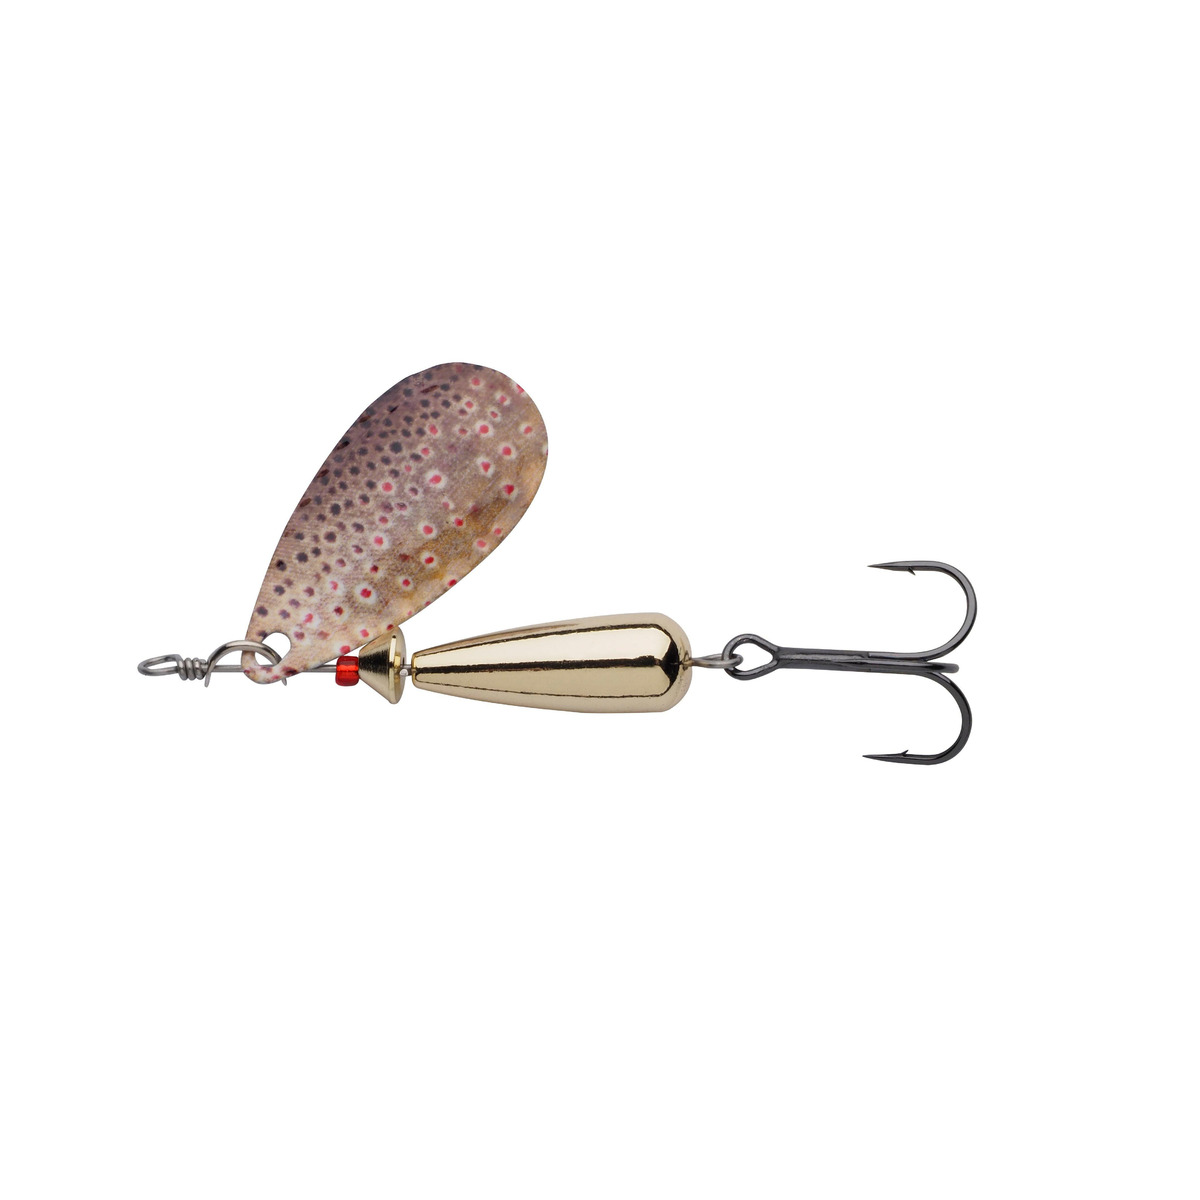 Abu Garcia Droppen Spinners 12 G - Brown Trout - 53 mm